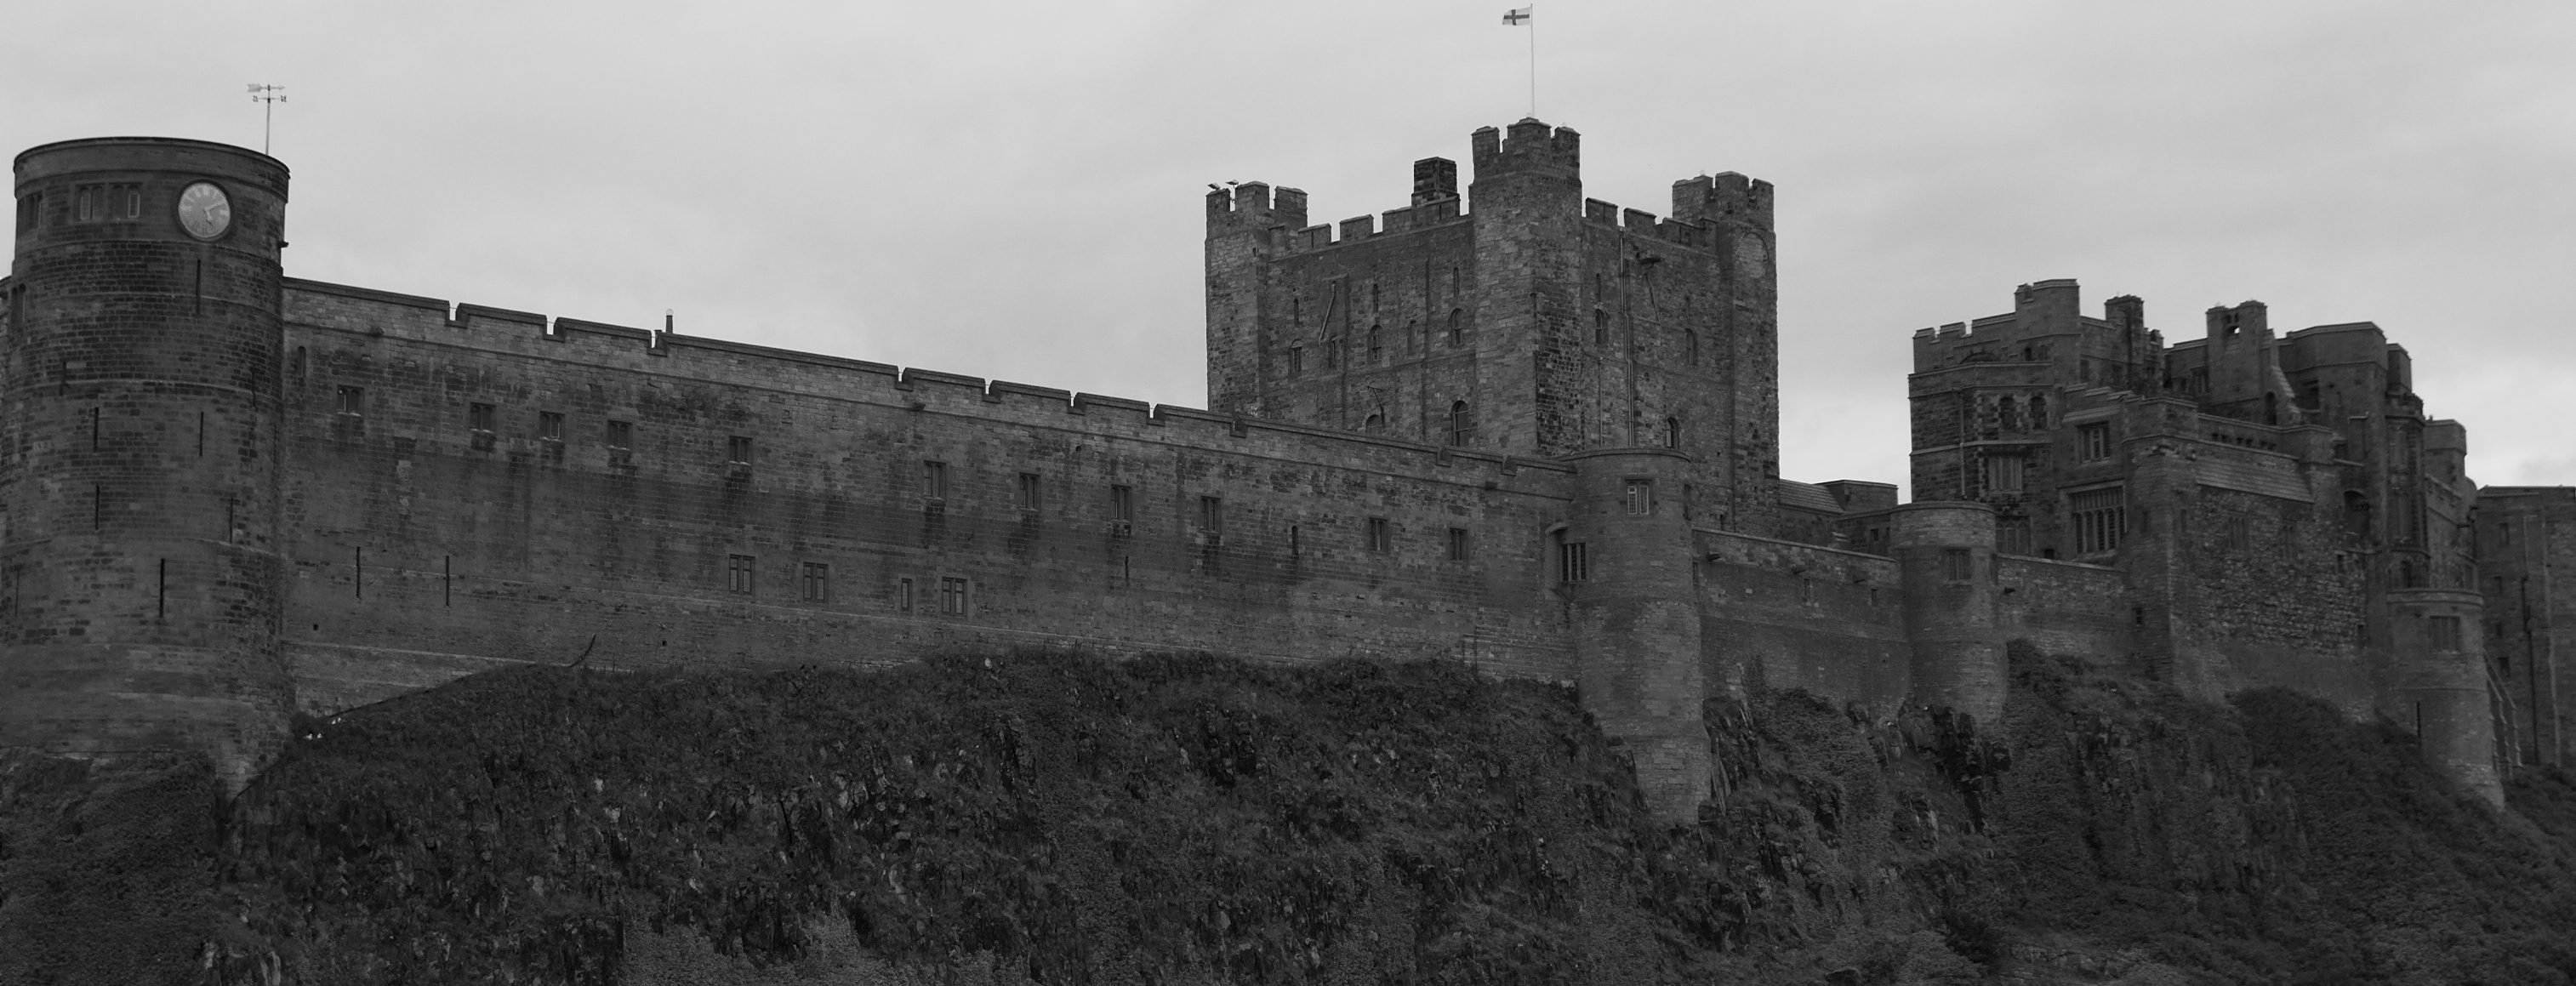 a castle is shown in black and white on a cloudy day